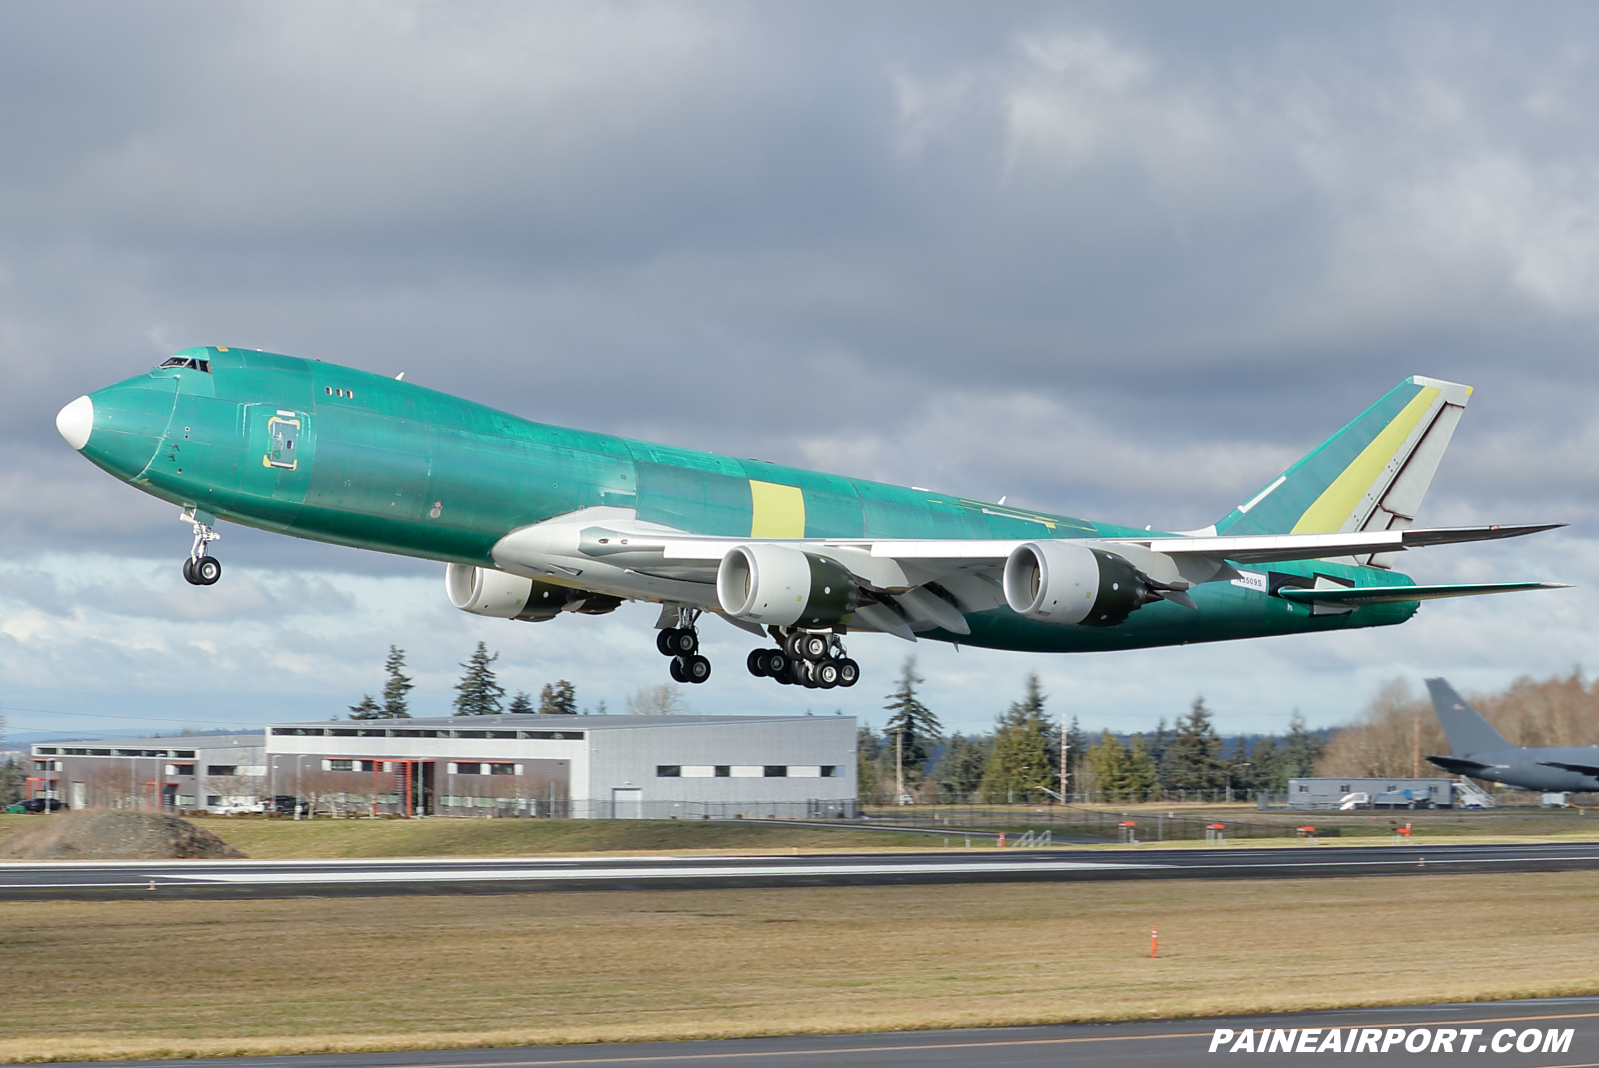 UPS 747-8F at KPAE Paine Field